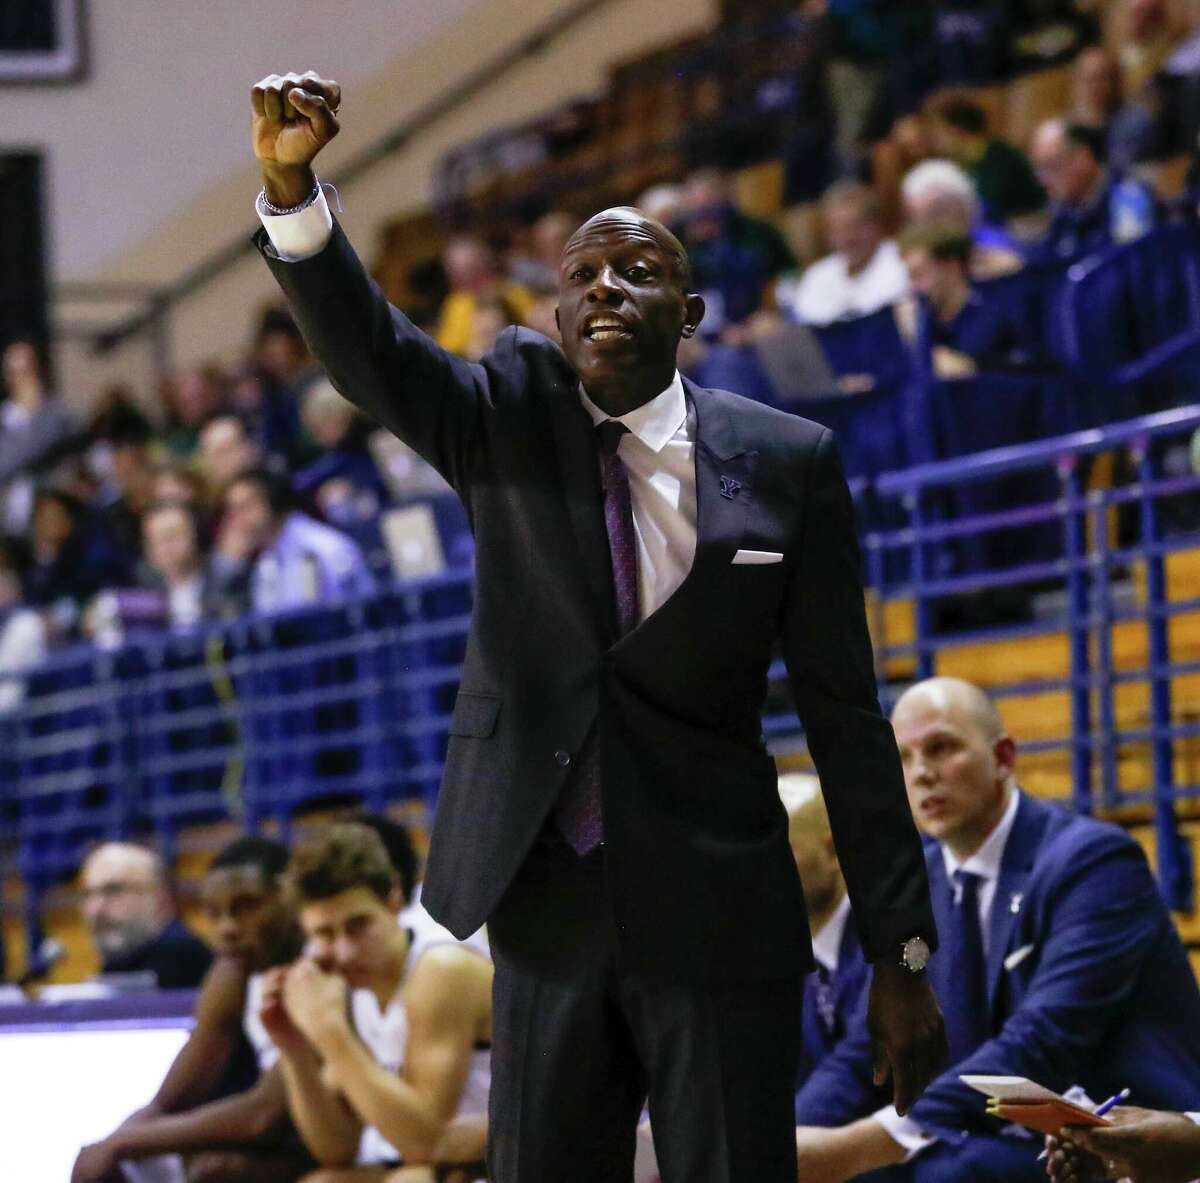 Yale men's basketball coach James Jones has led the Bulldogs to five Ivy League tournaments, including as the top seed this year. Yale is 3-1 in Ivy League semifinals.